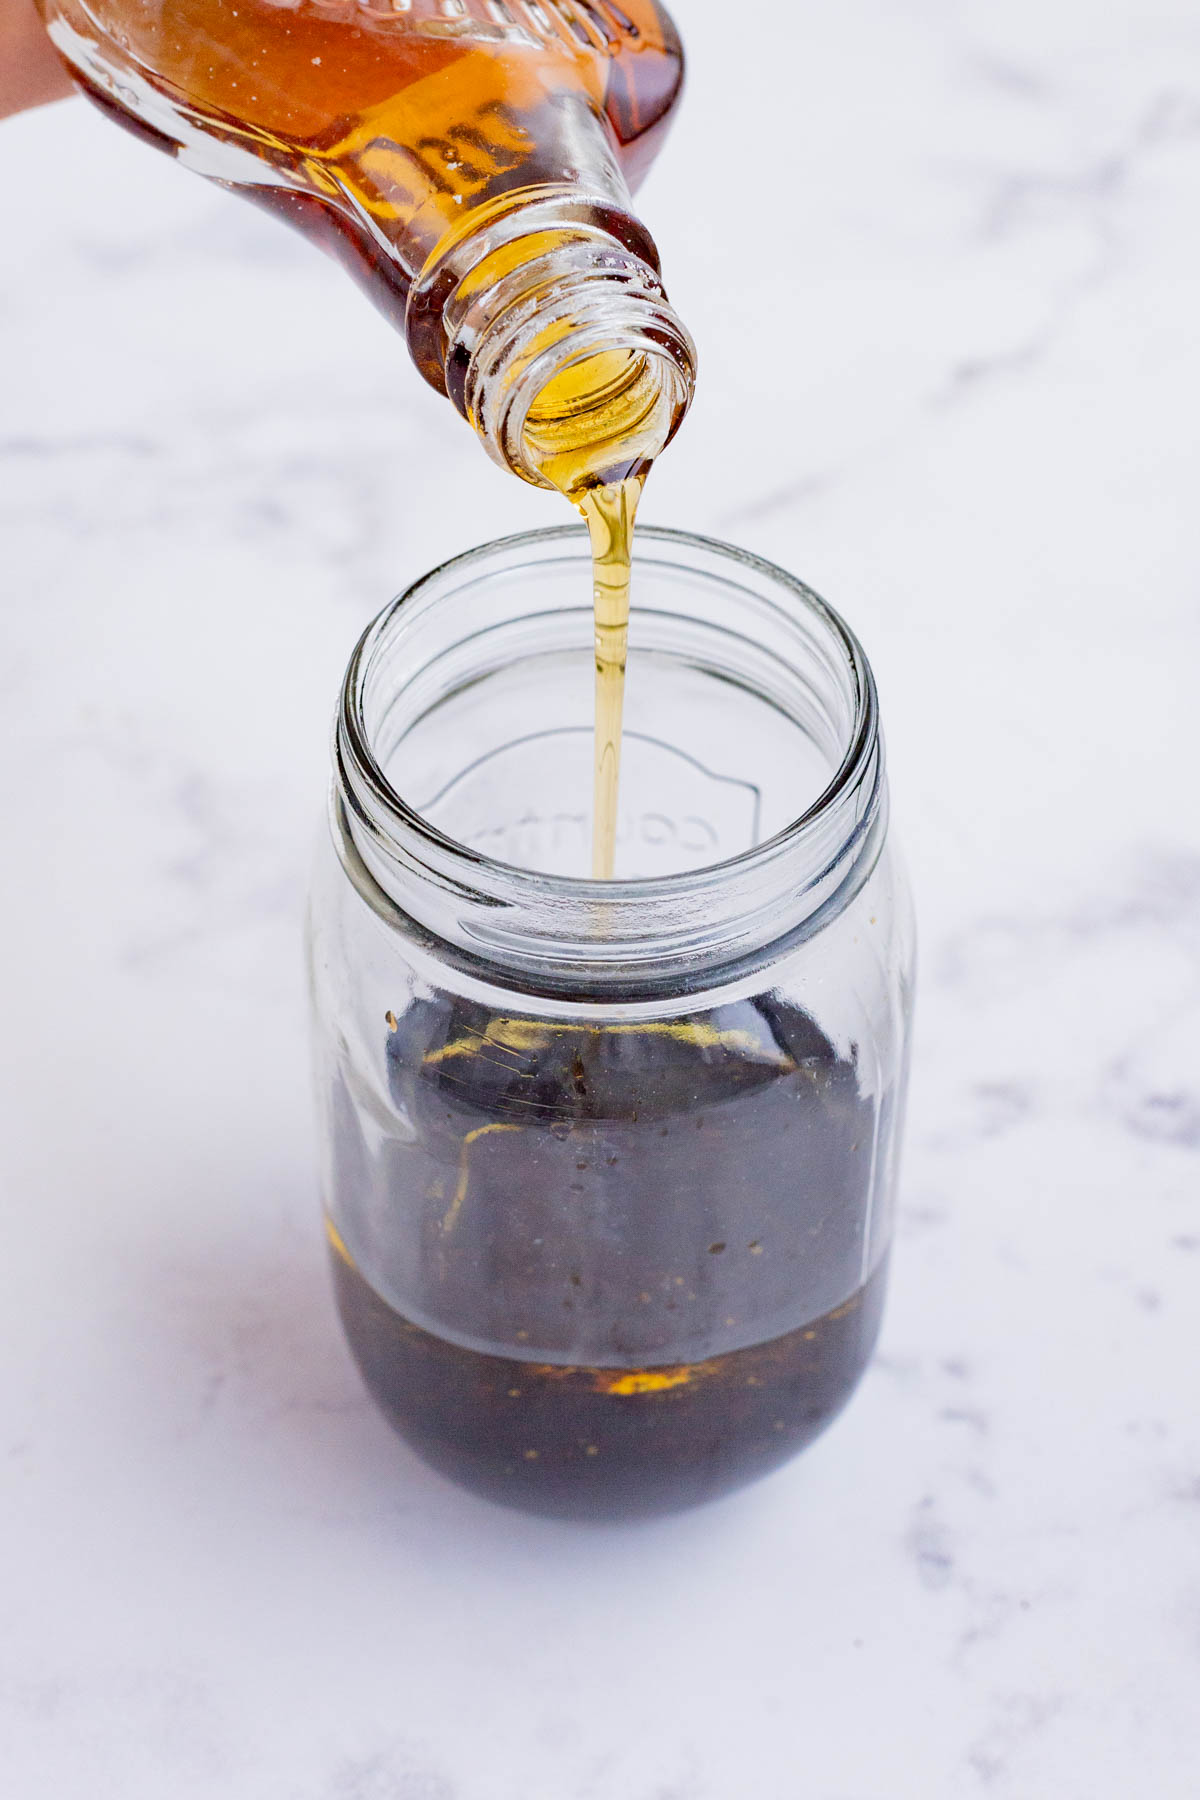 The balsamic vinaigrette is made in a jar.